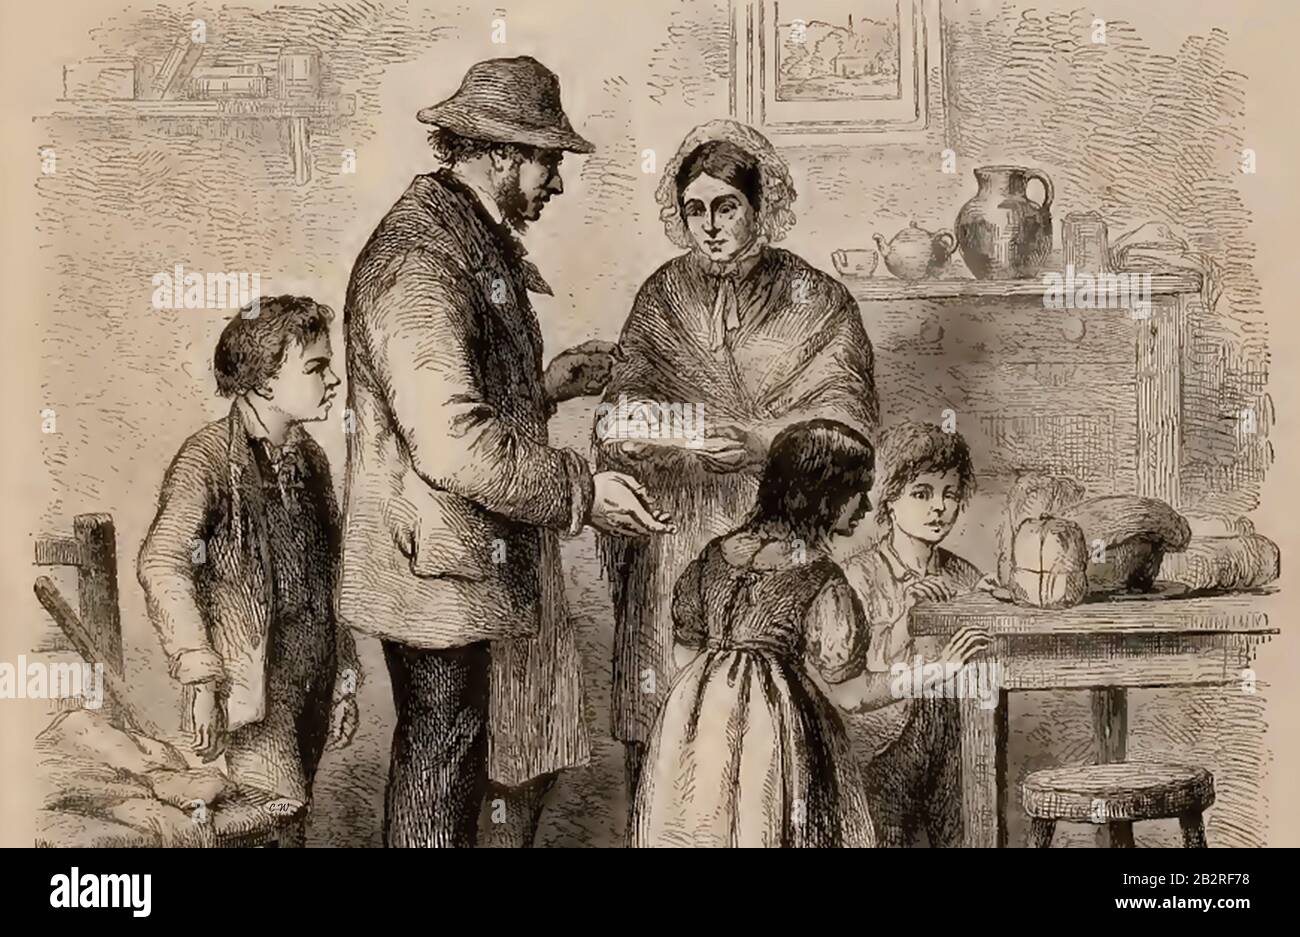 1800s Family High Resolution Stock Photography and Images - Alamy